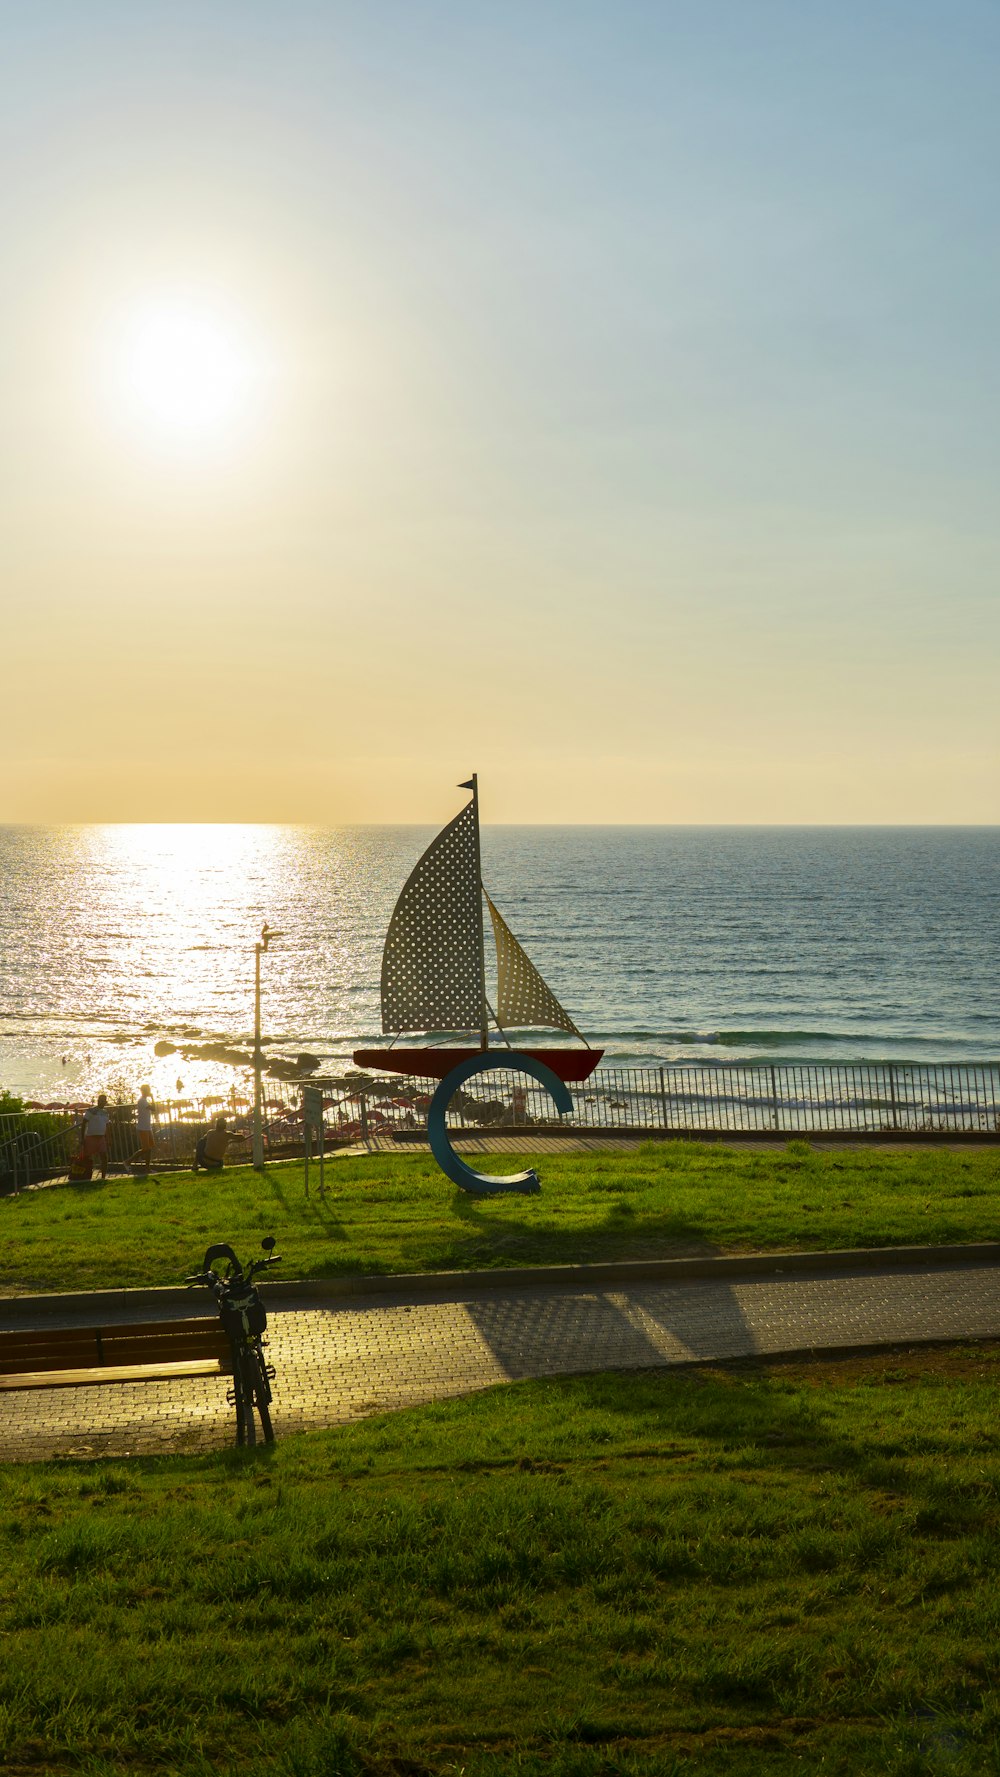 a sailboat is on the grass near the ocean